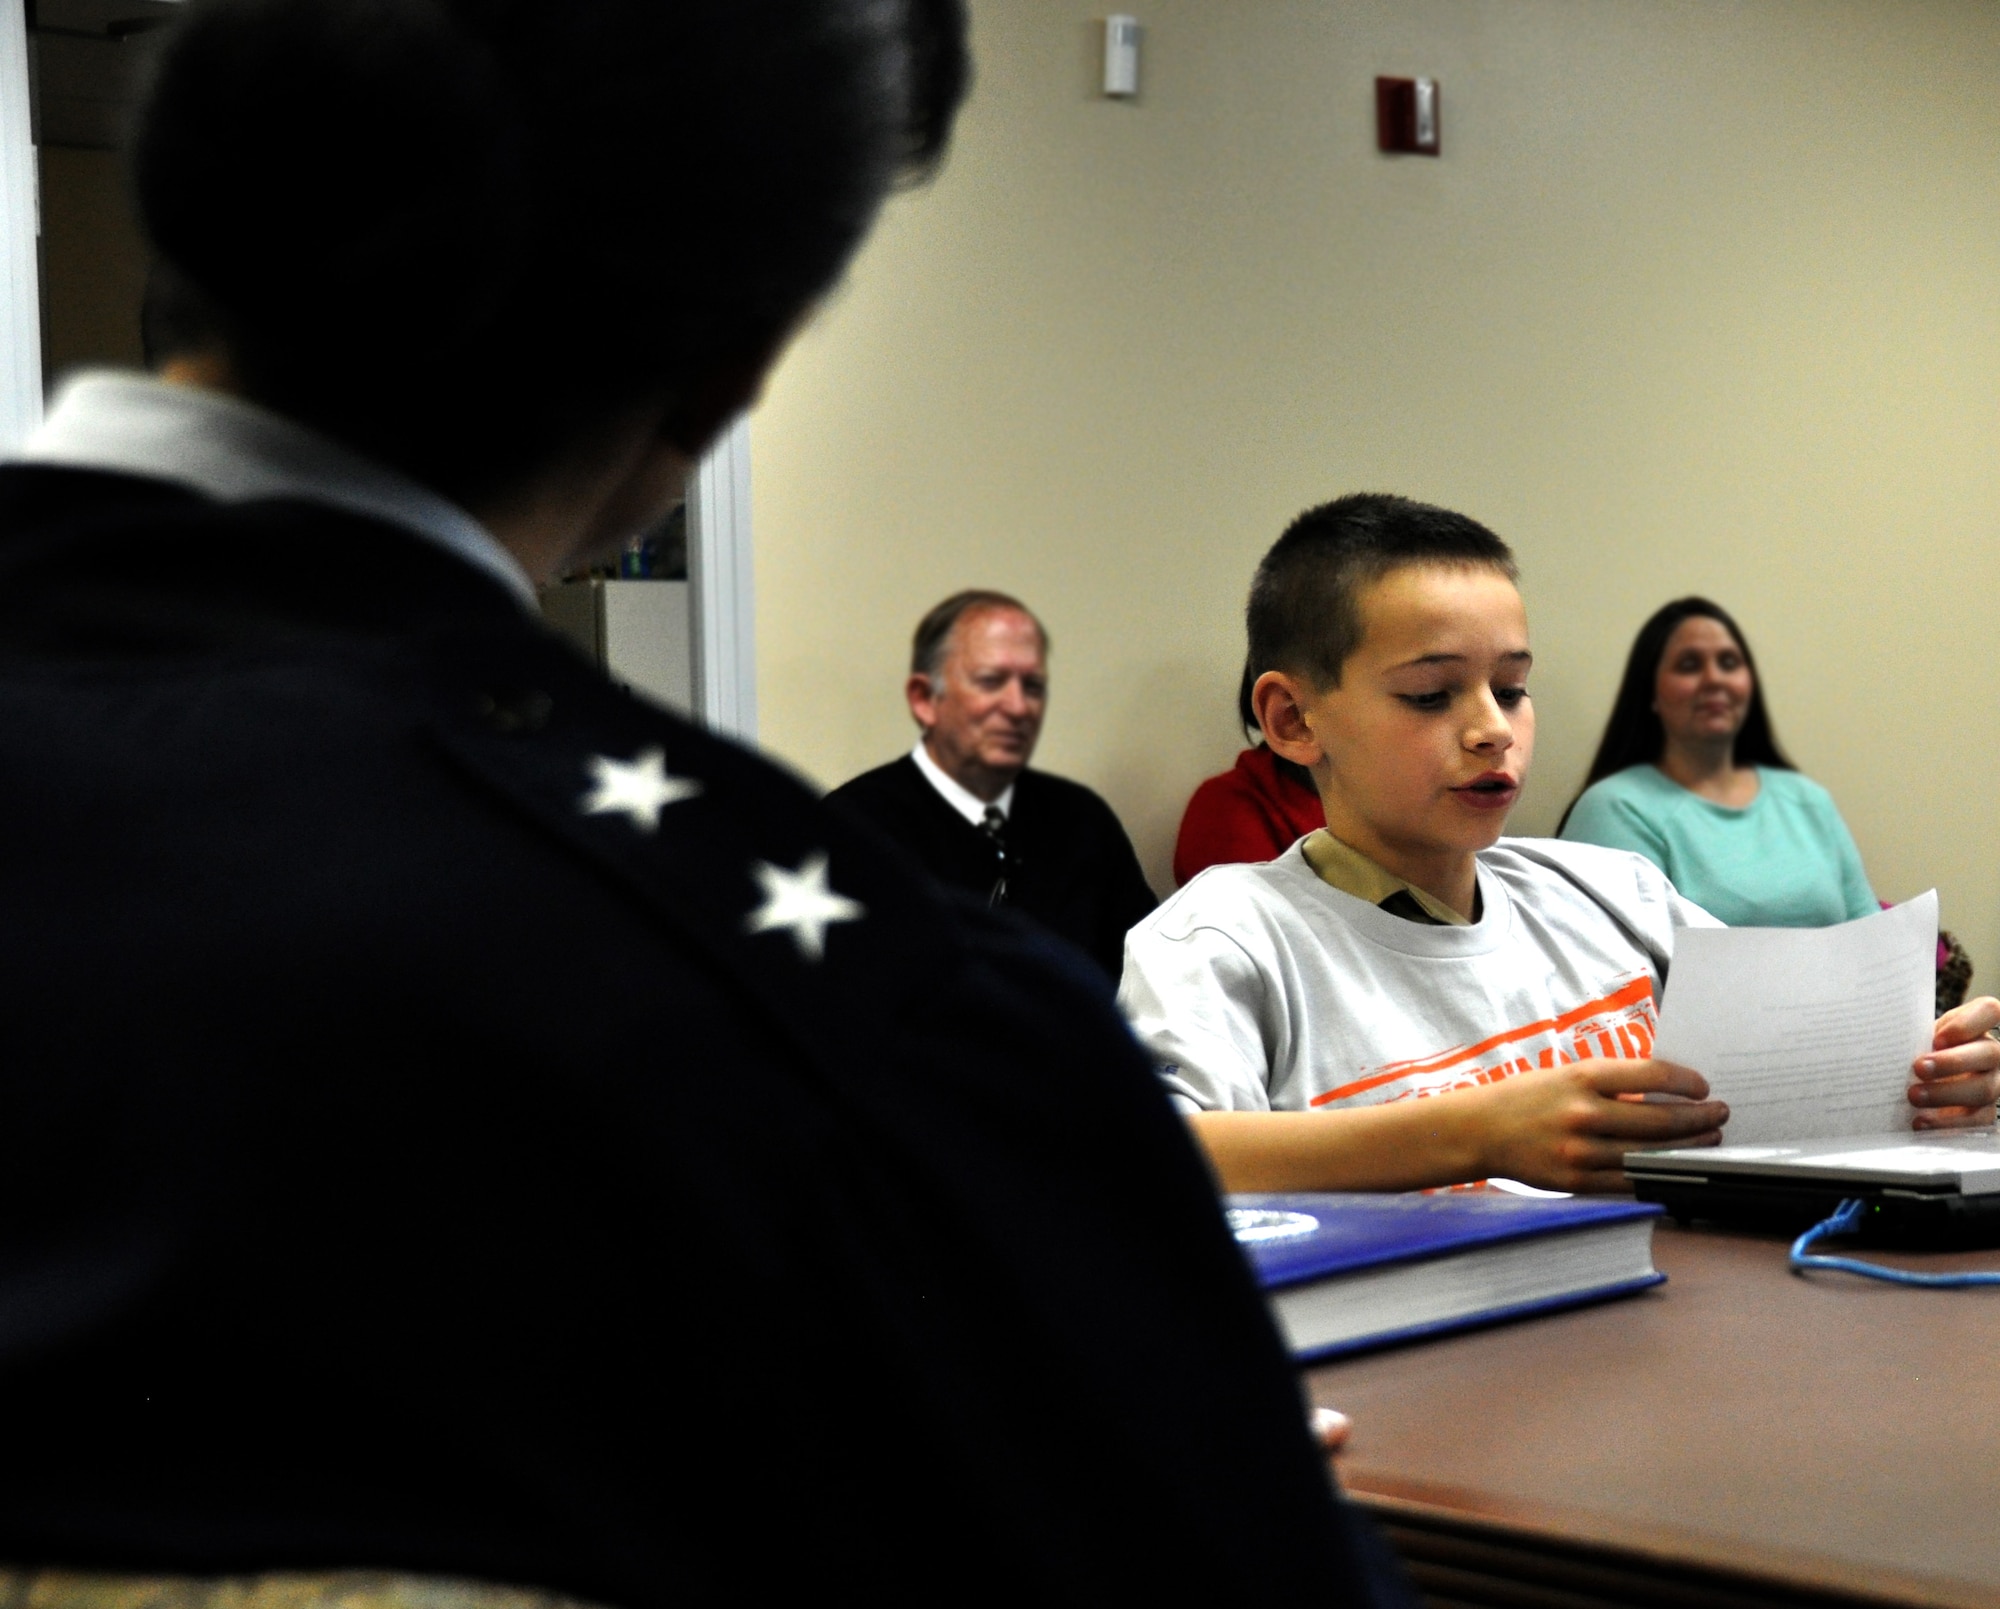 Dalton Moyse, a student at Bright Star Elementary in Douglasville, Ga. asks Maj. Gen. Stayce Harris, 22nd Air Force commander, a question at the 22nd AF headquarters at Dobbins Air Reserve Base, Ga., Feb. 7, 2015. Ten students from Bright Star visited the installation to interview Harris for Black History month. (U.S. Air Force photo/Senior Airman Daniel Phelps)